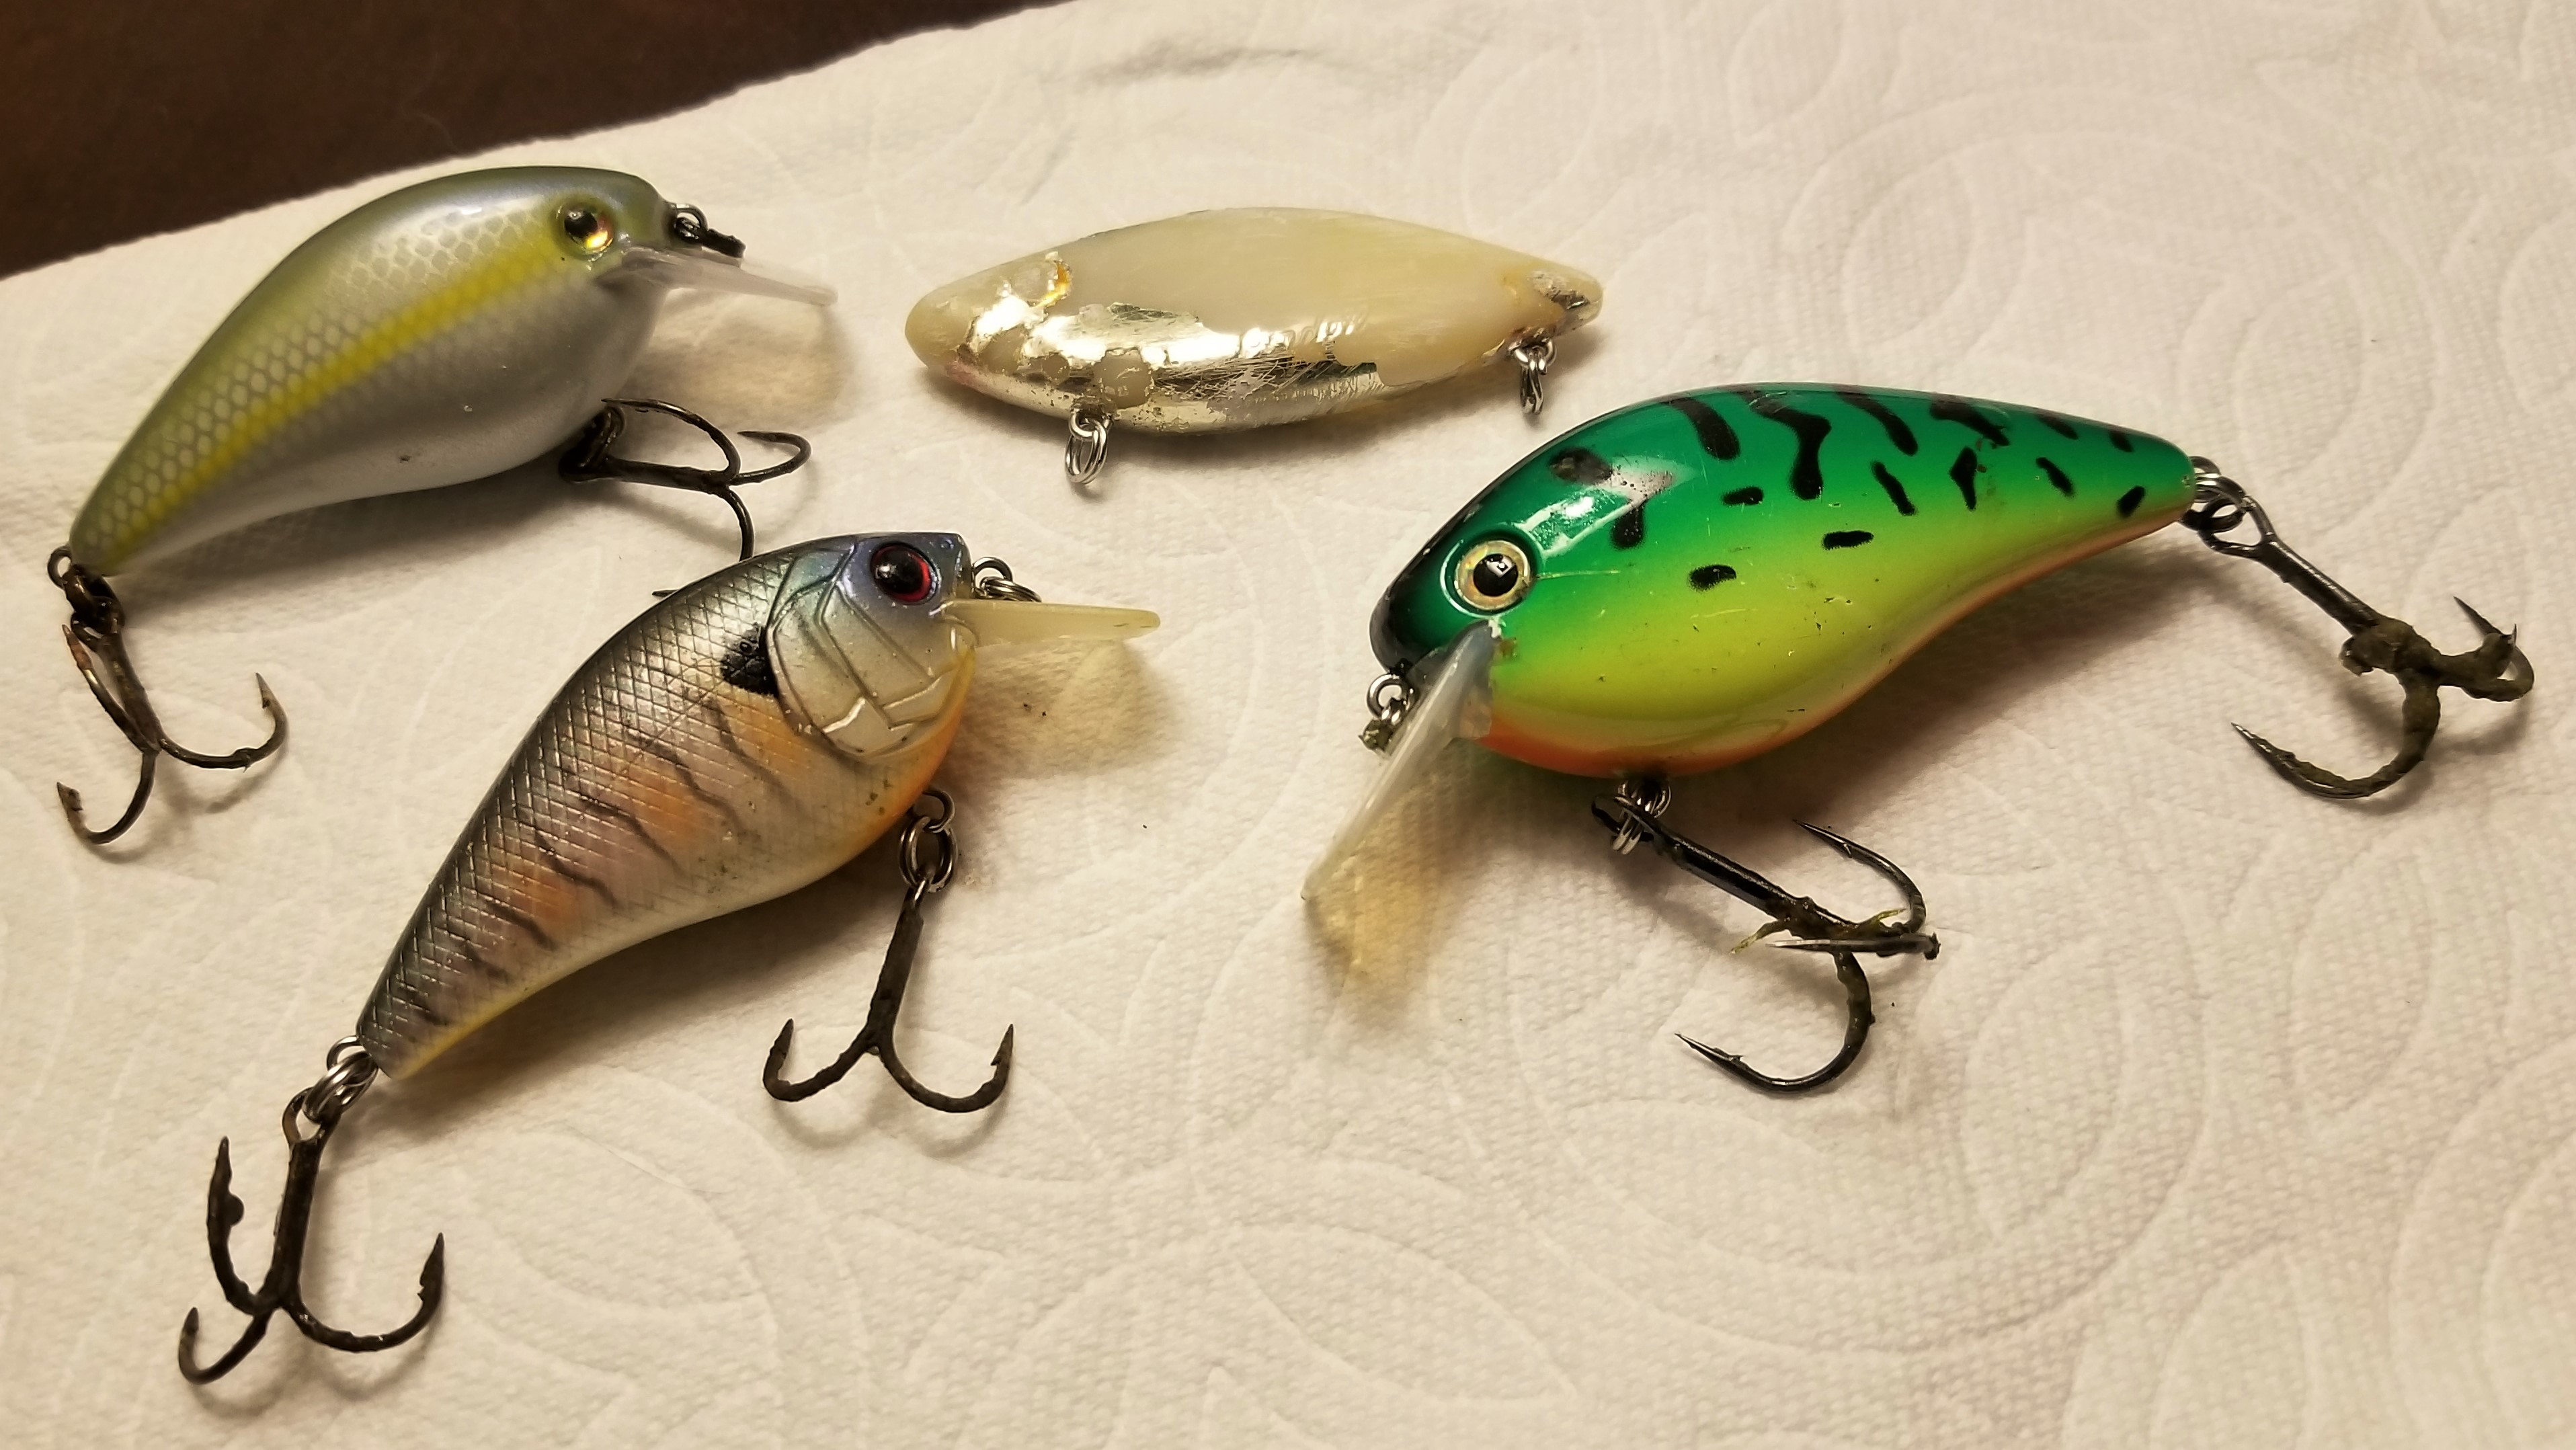 Crank baits drying on a paper towel